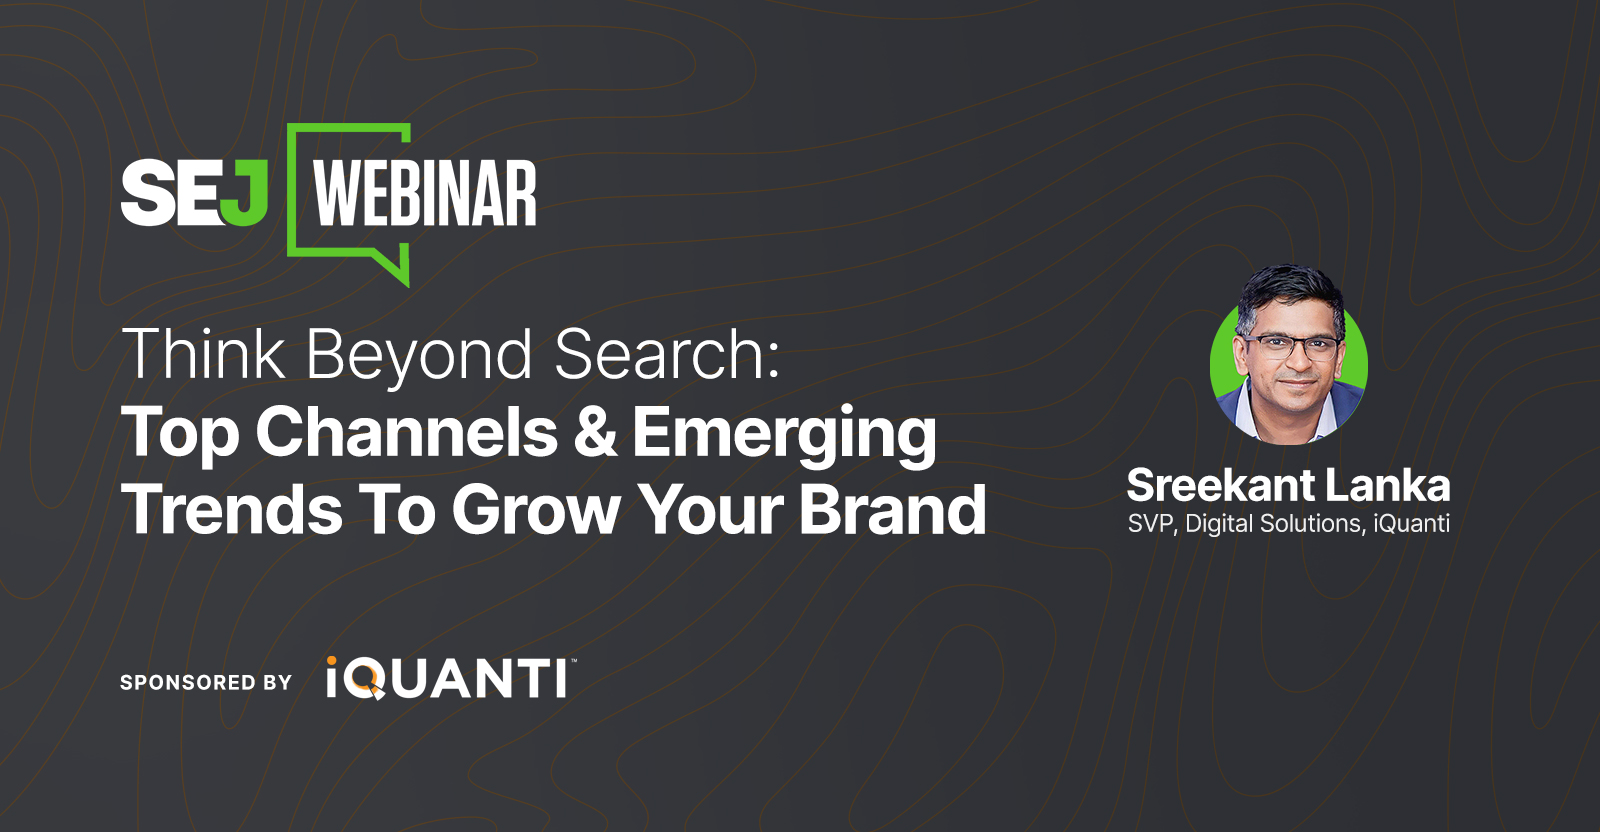 Top channels and trends to grow your brand